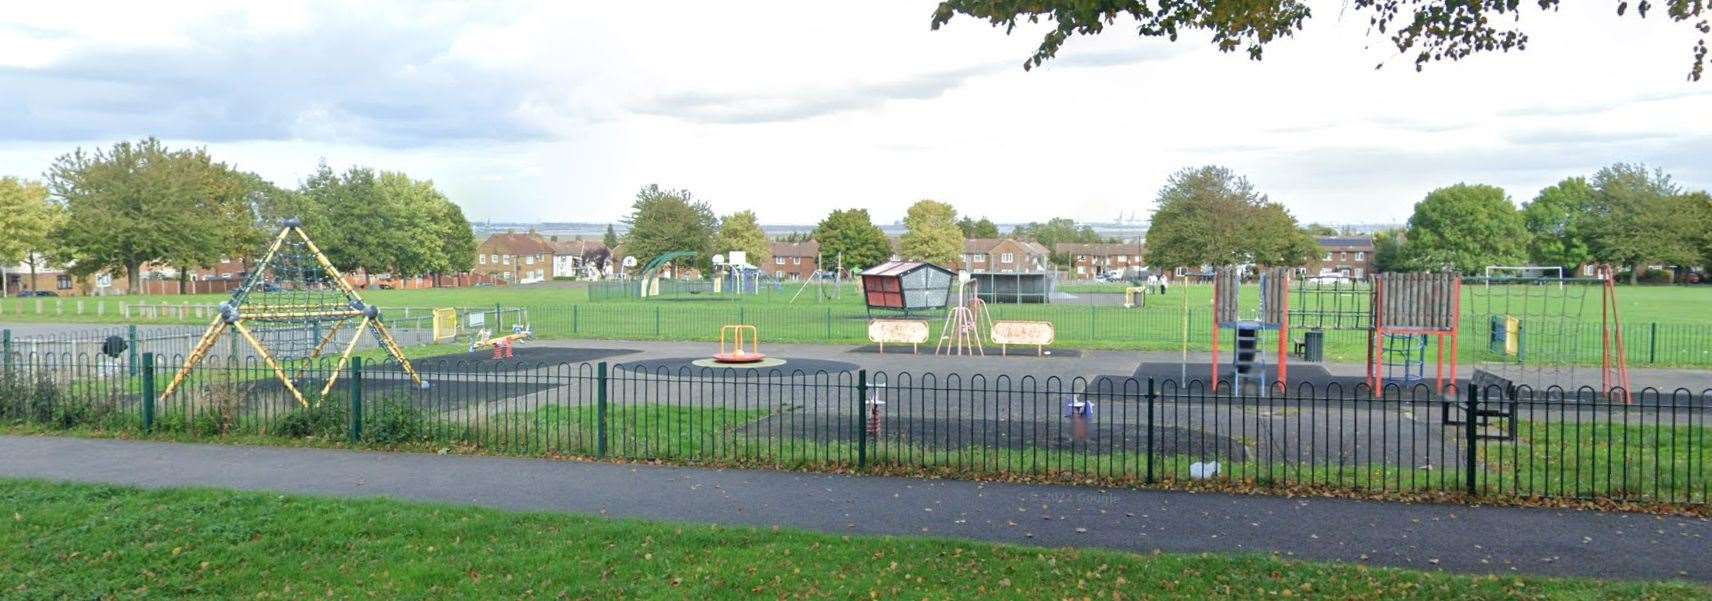 Beechings Way Recreation Ground in Gillingham is going to have a revamp